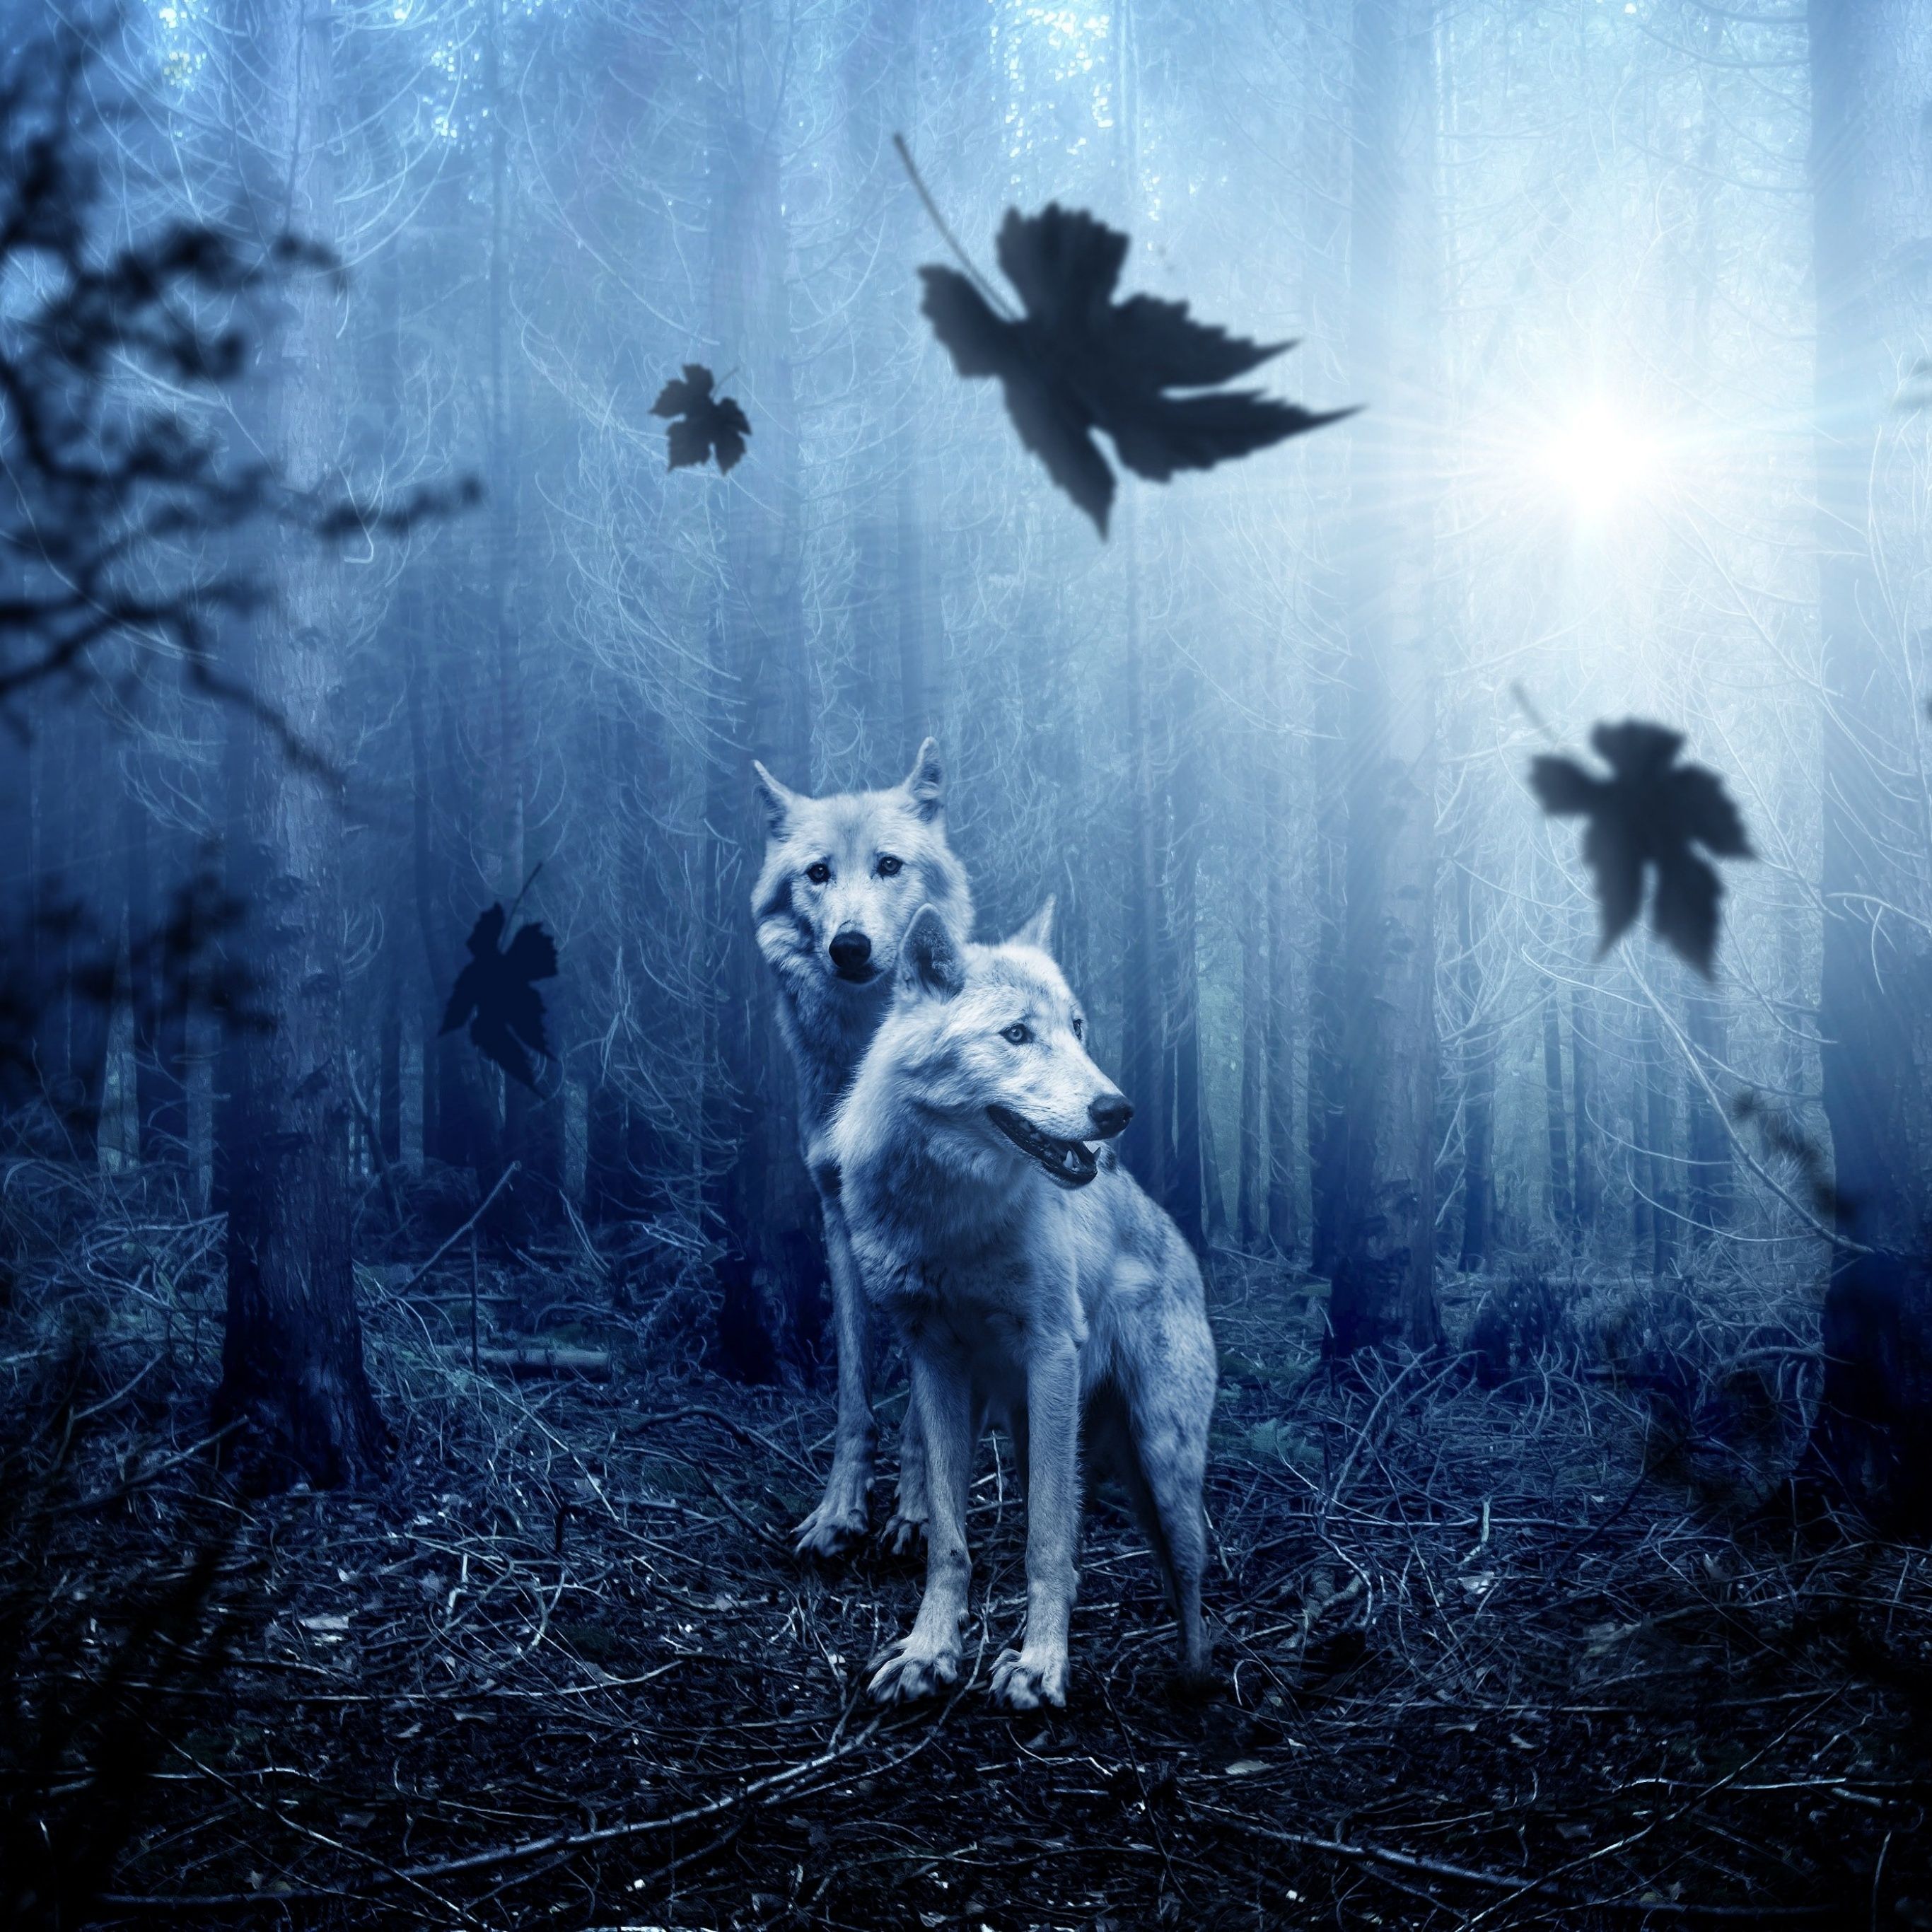 Two wolves in a forest with birds flying around them - Wolf